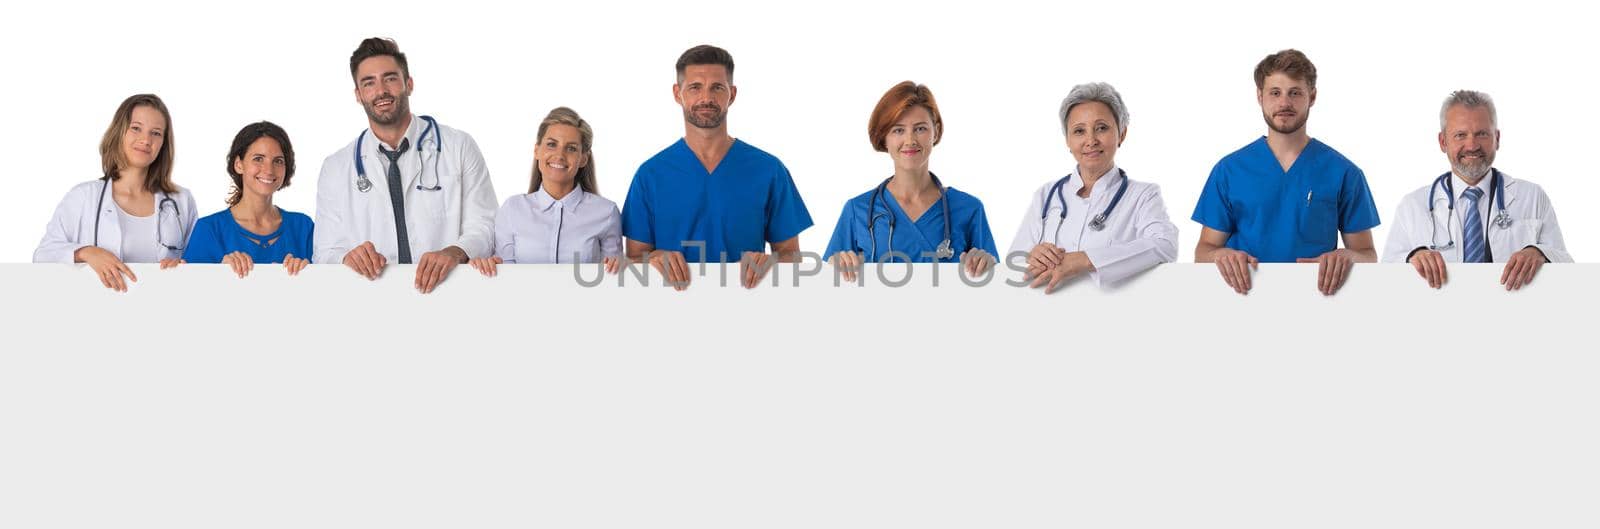 Group of doctors with blank banner isolated over a white background